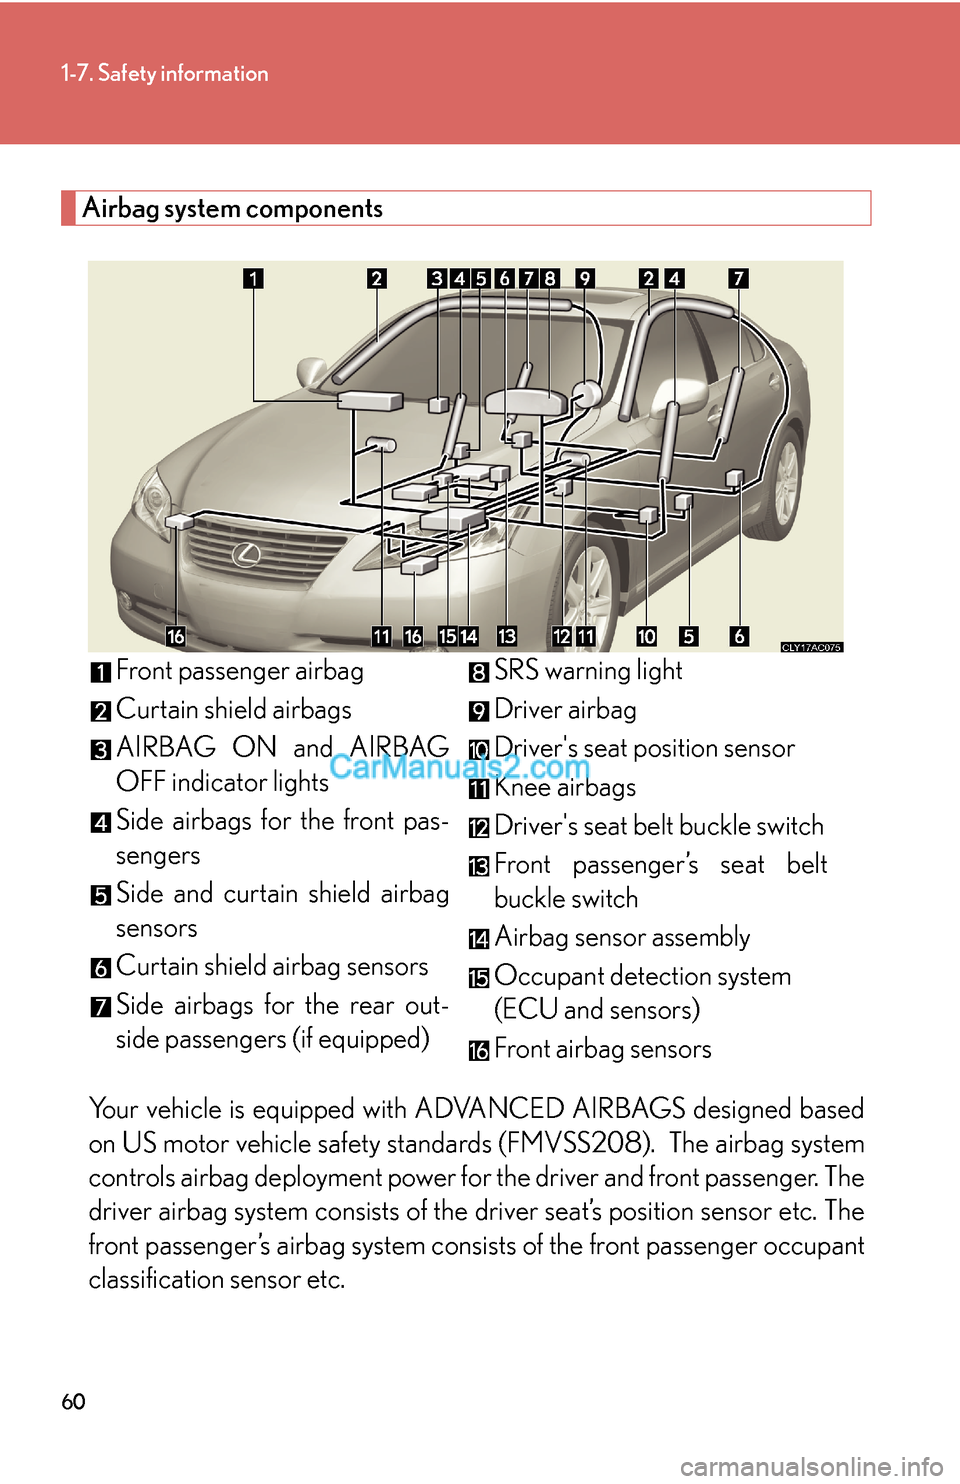 Lexus ES350 2007  Safety information 60
1-7. Safety information
Airbag system components
Your vehicle is equipped with ADVANCED AIRBAGS designed based
on US motor vehicle safety standards (FMVSS208).  The airbag system
controls airbag de